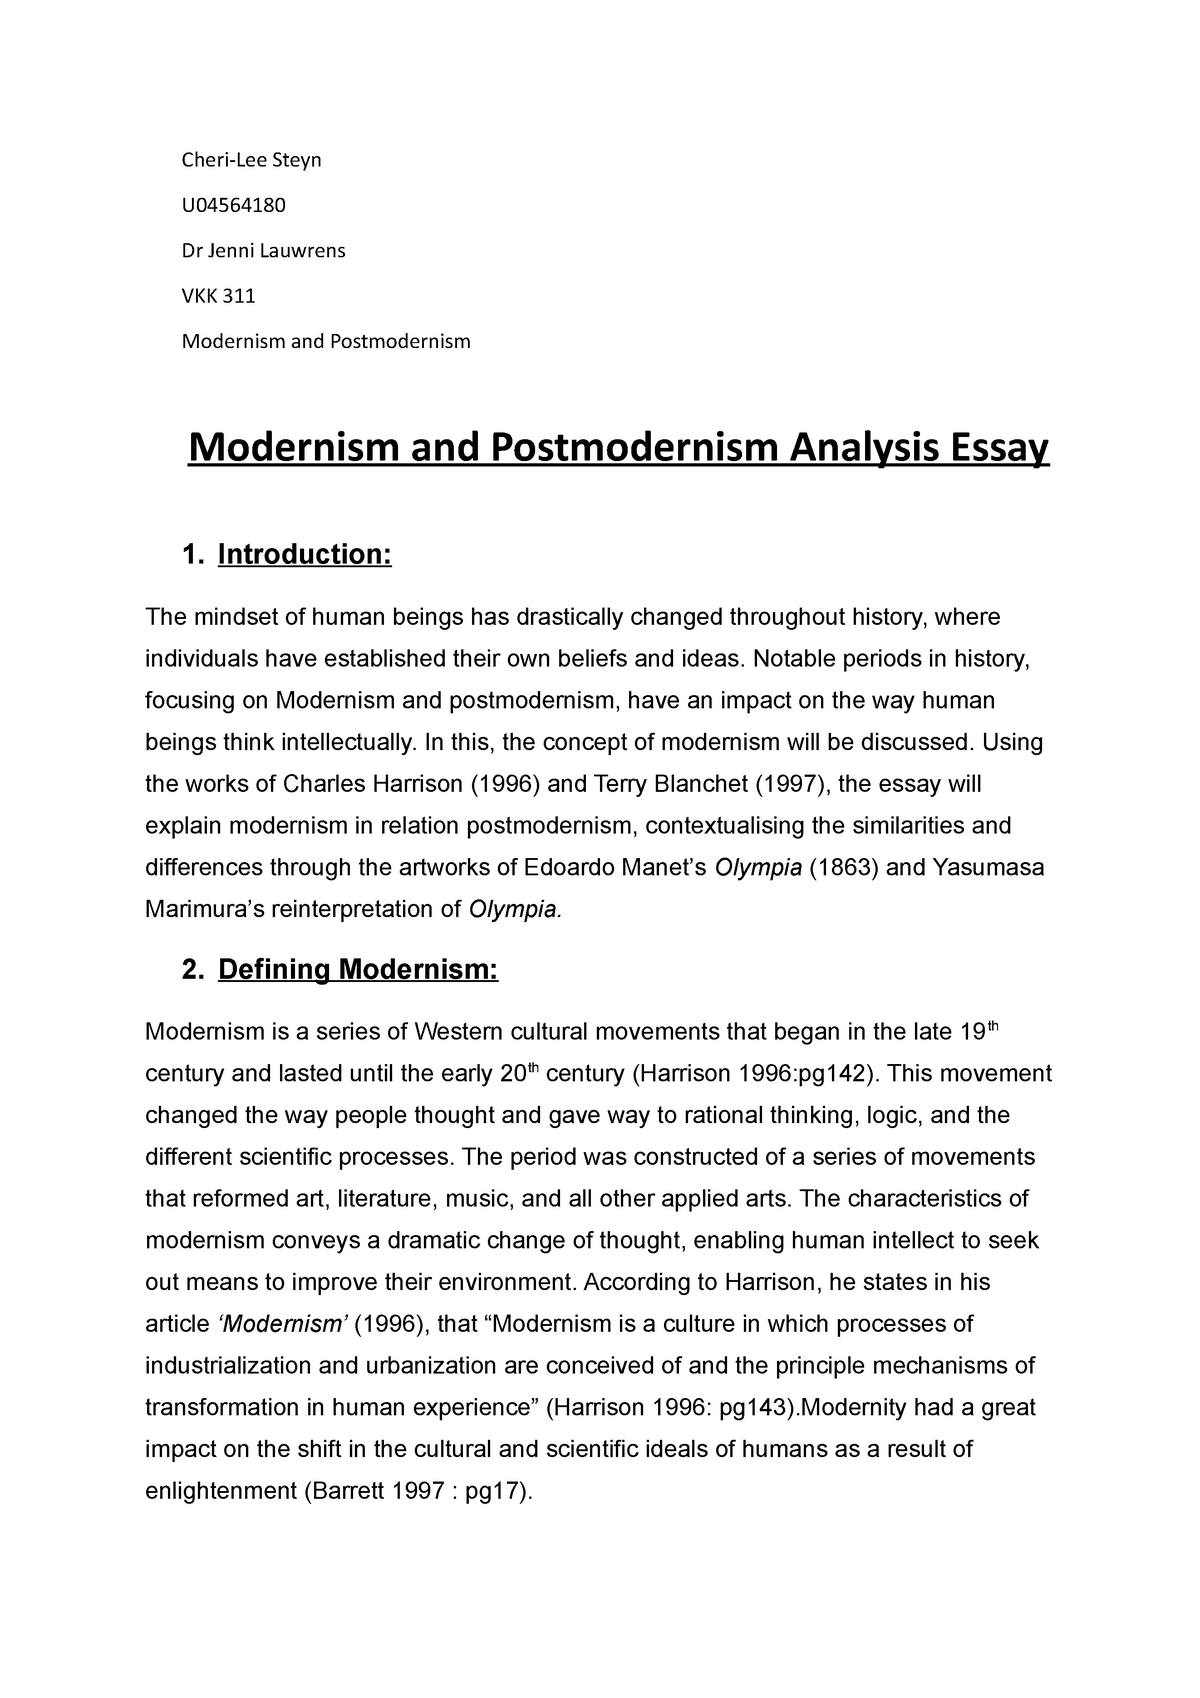 essay questions on postmodernism